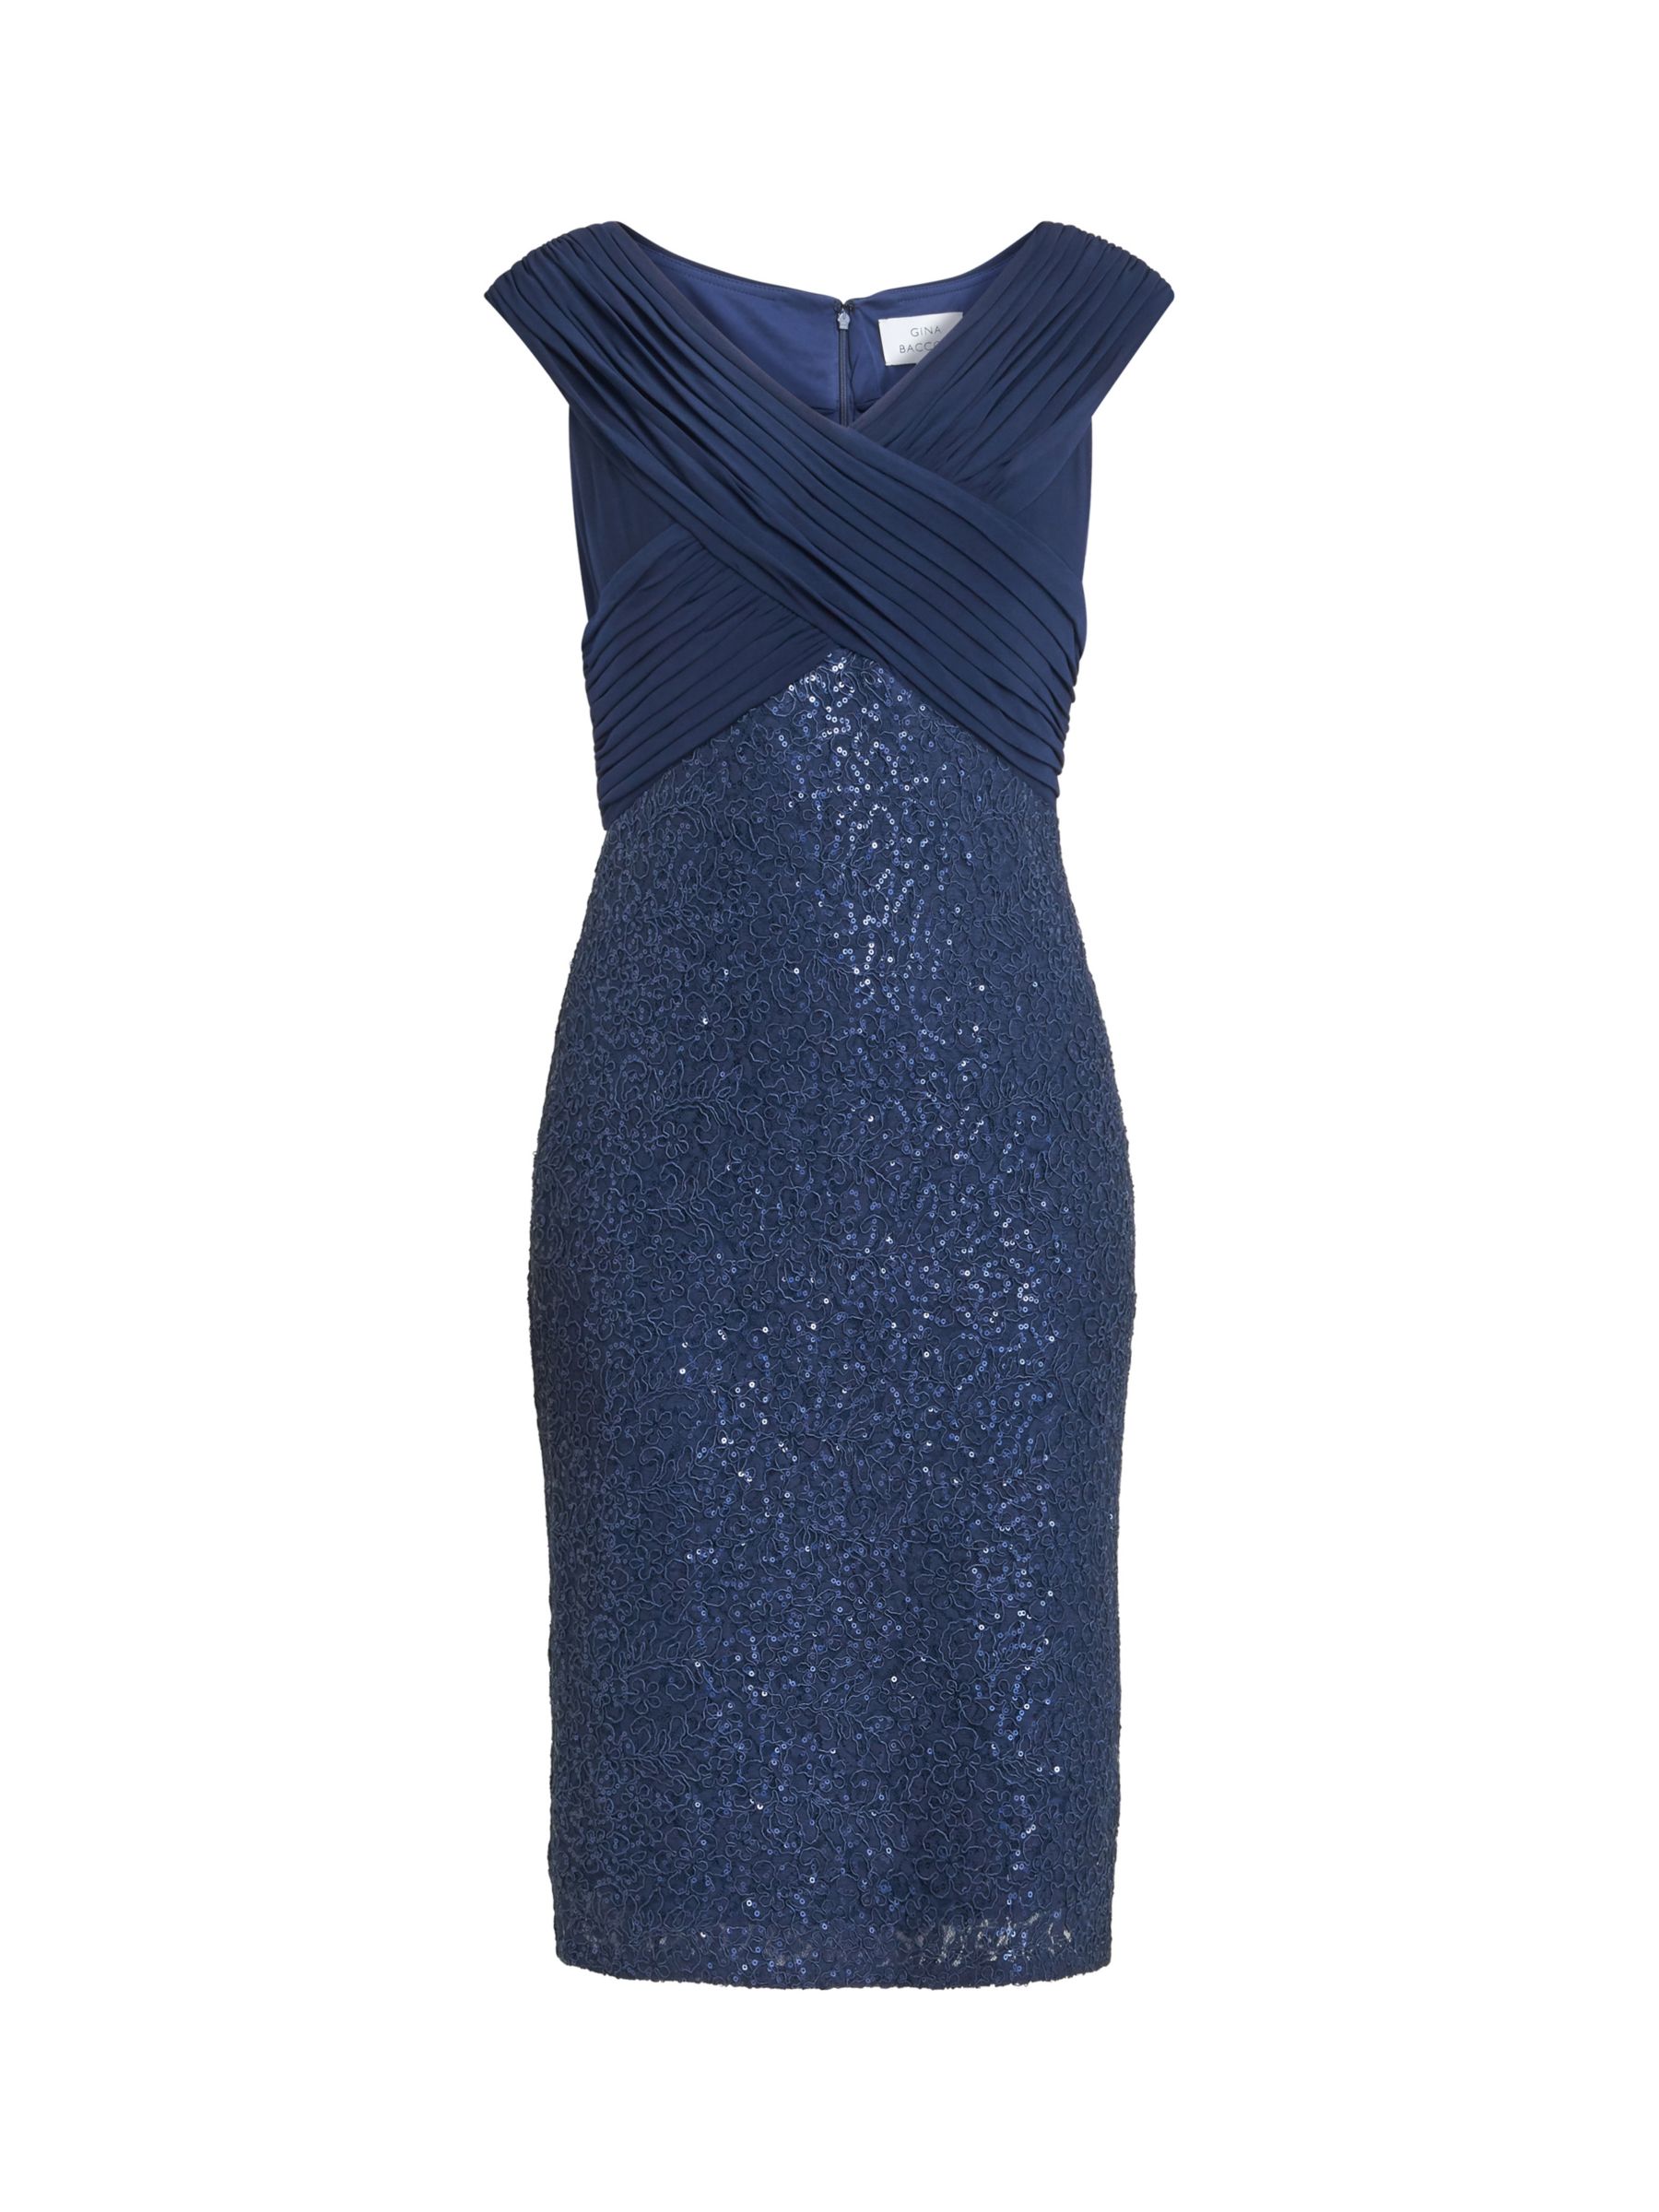 Buy Gina Bacconi Blair Cross Pleated Bodice Dress, Navy Online at johnlewis.com